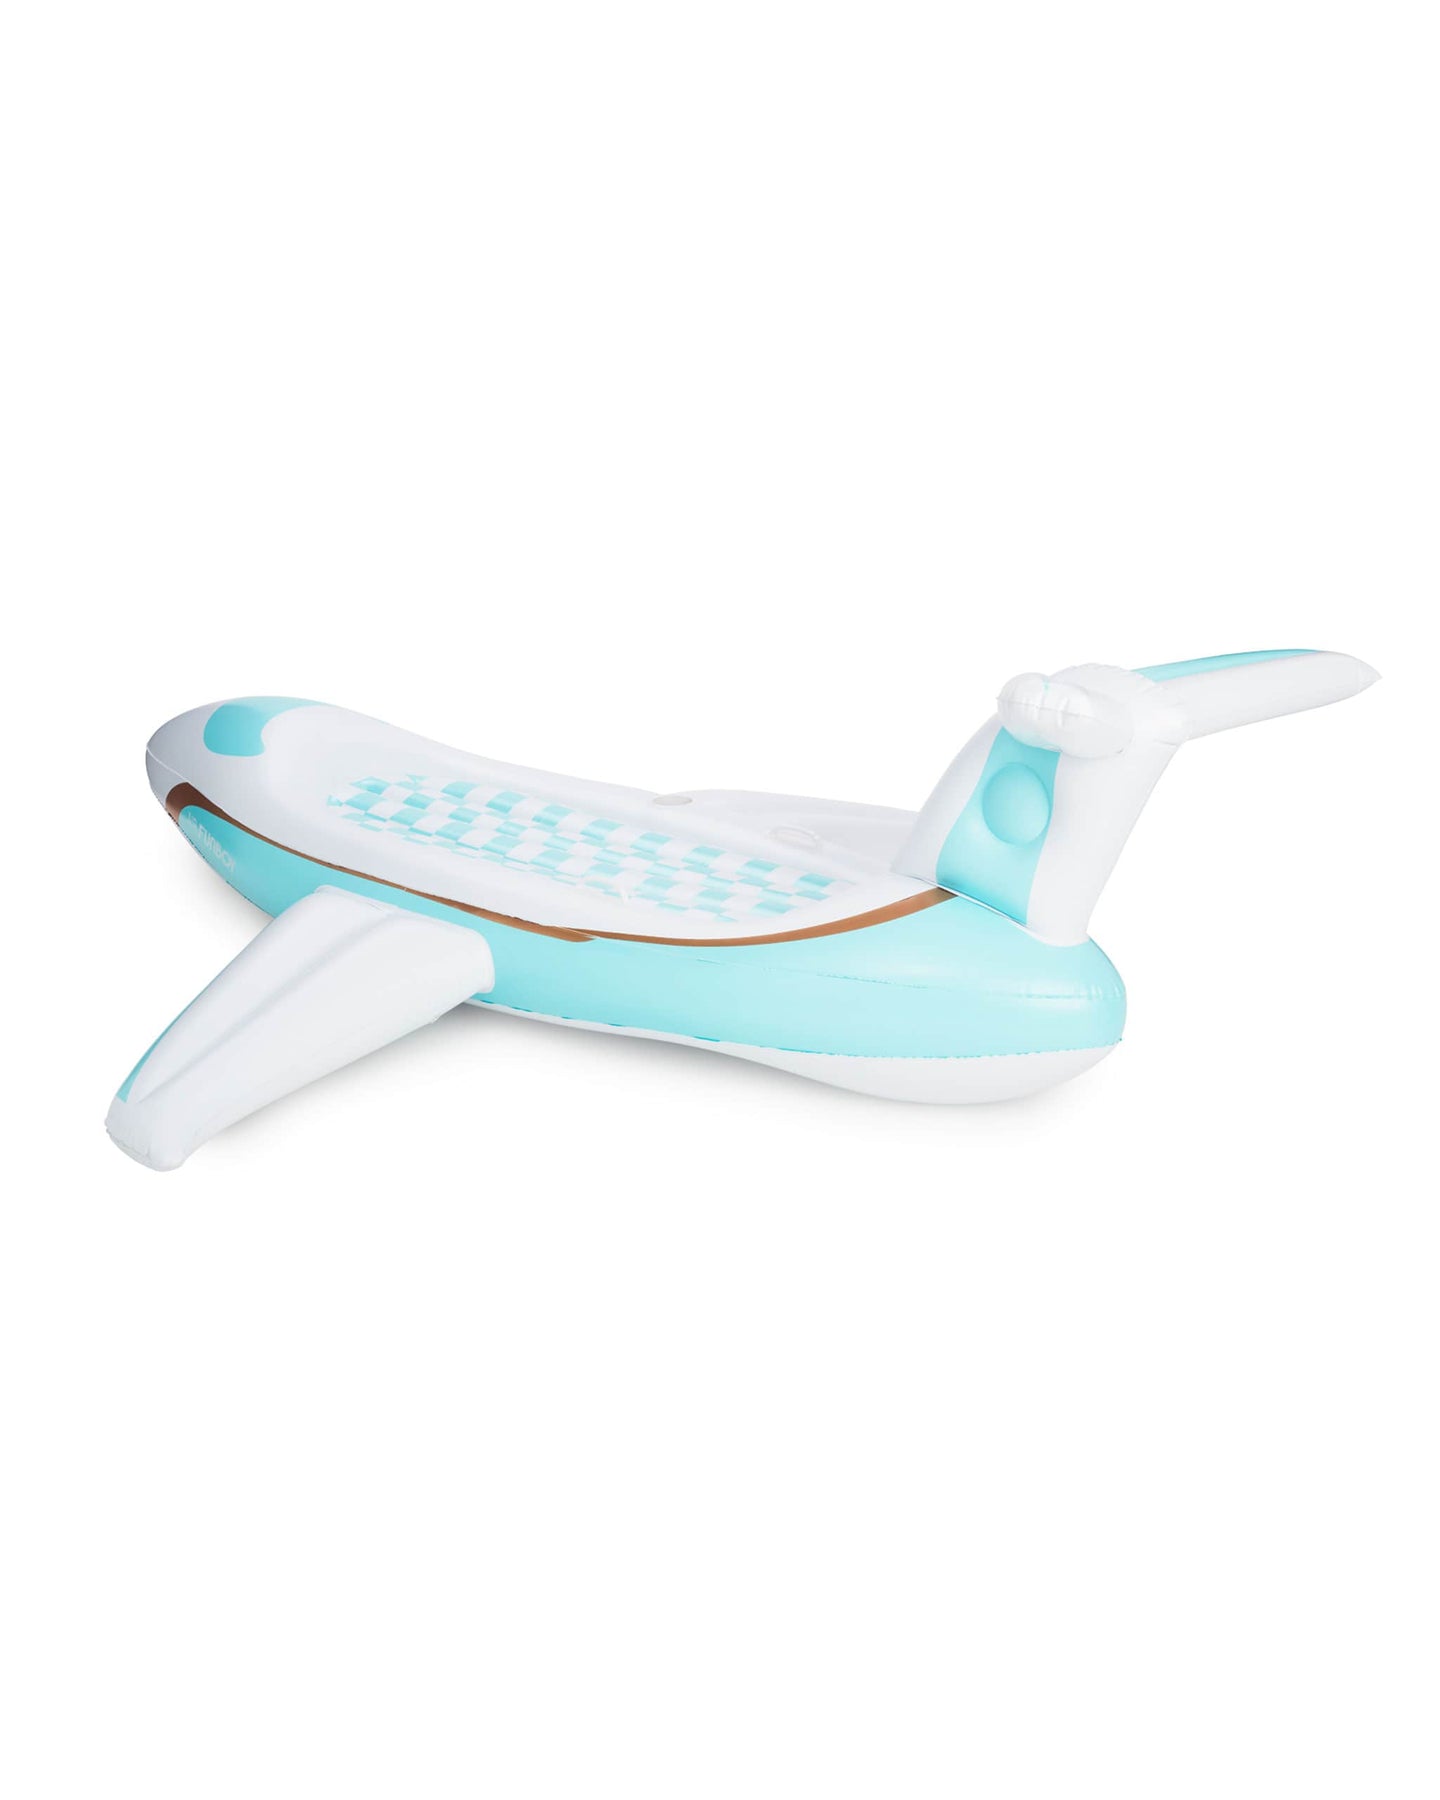 Best Pool Floats - Plane Private Jet